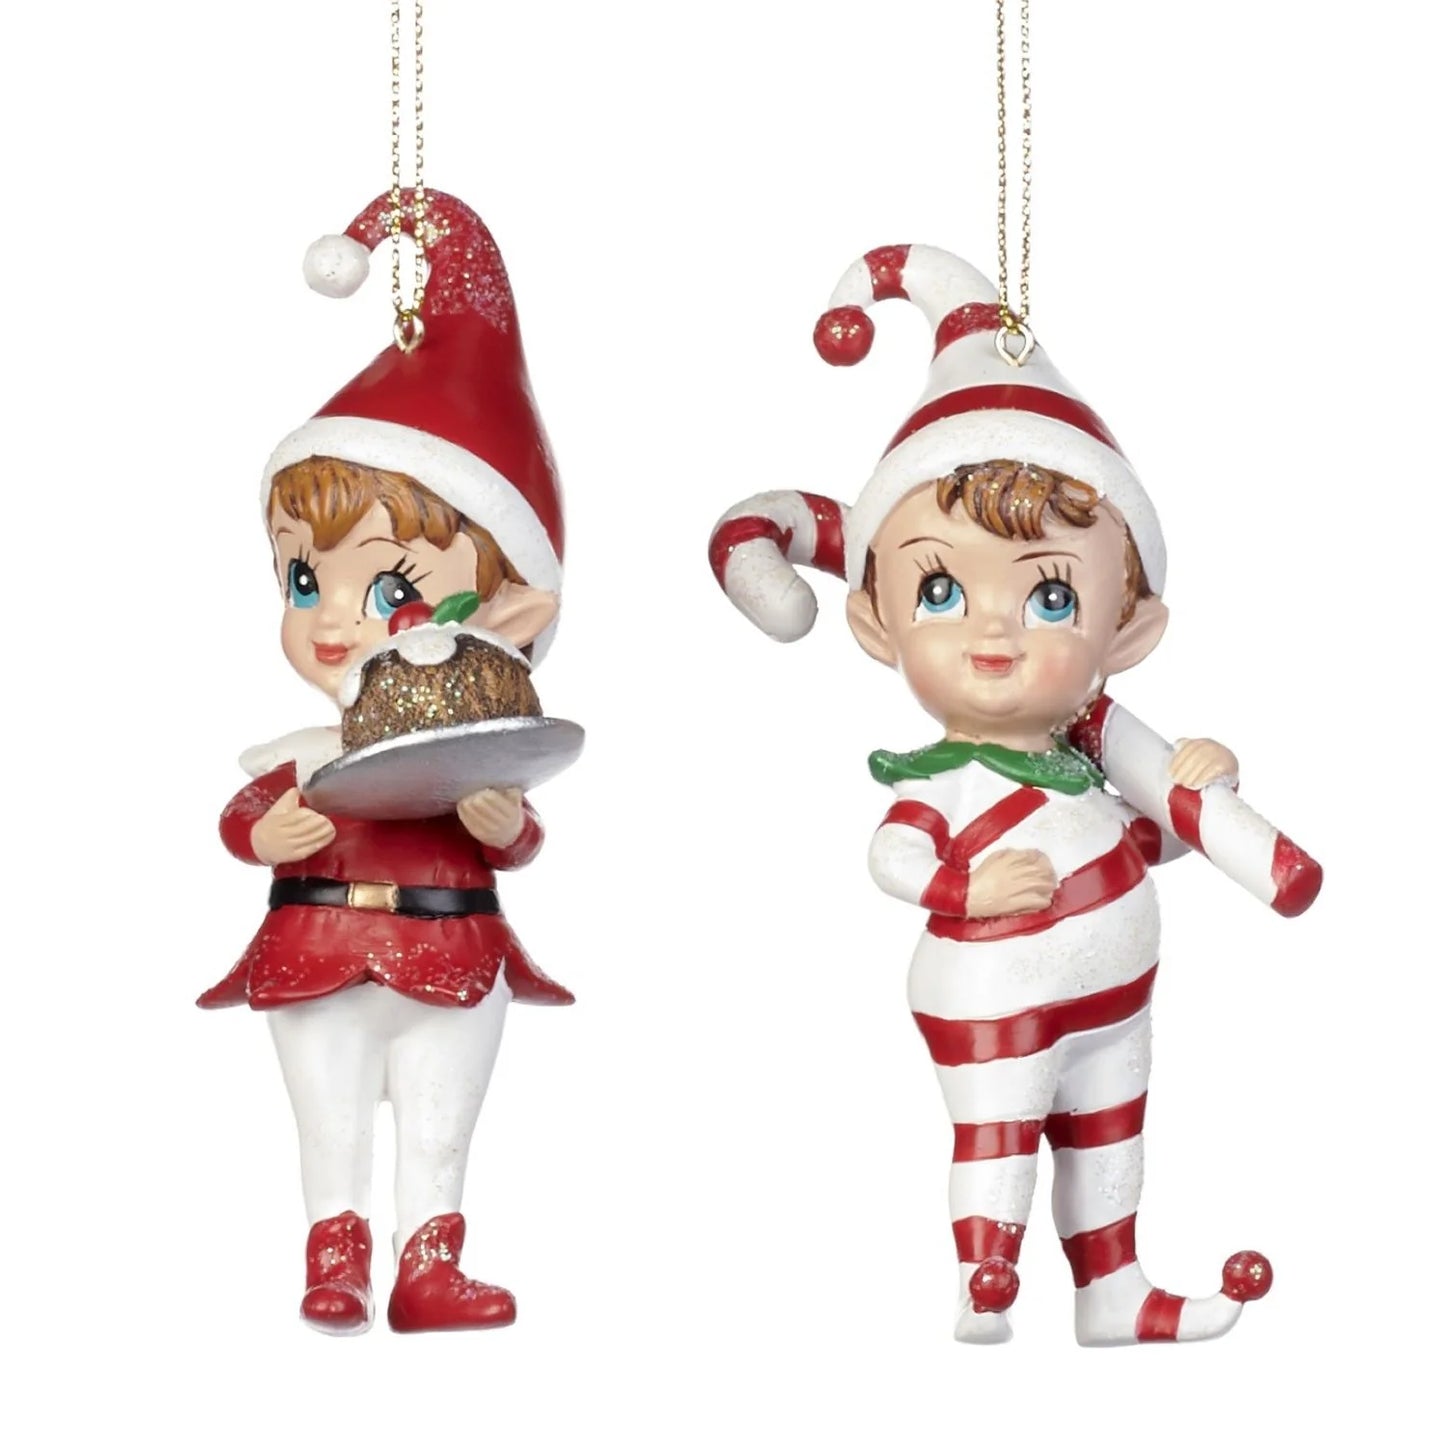 Xmas Elf with Candy Cane / Cake Ornament 11.5cm - 2 Assortments